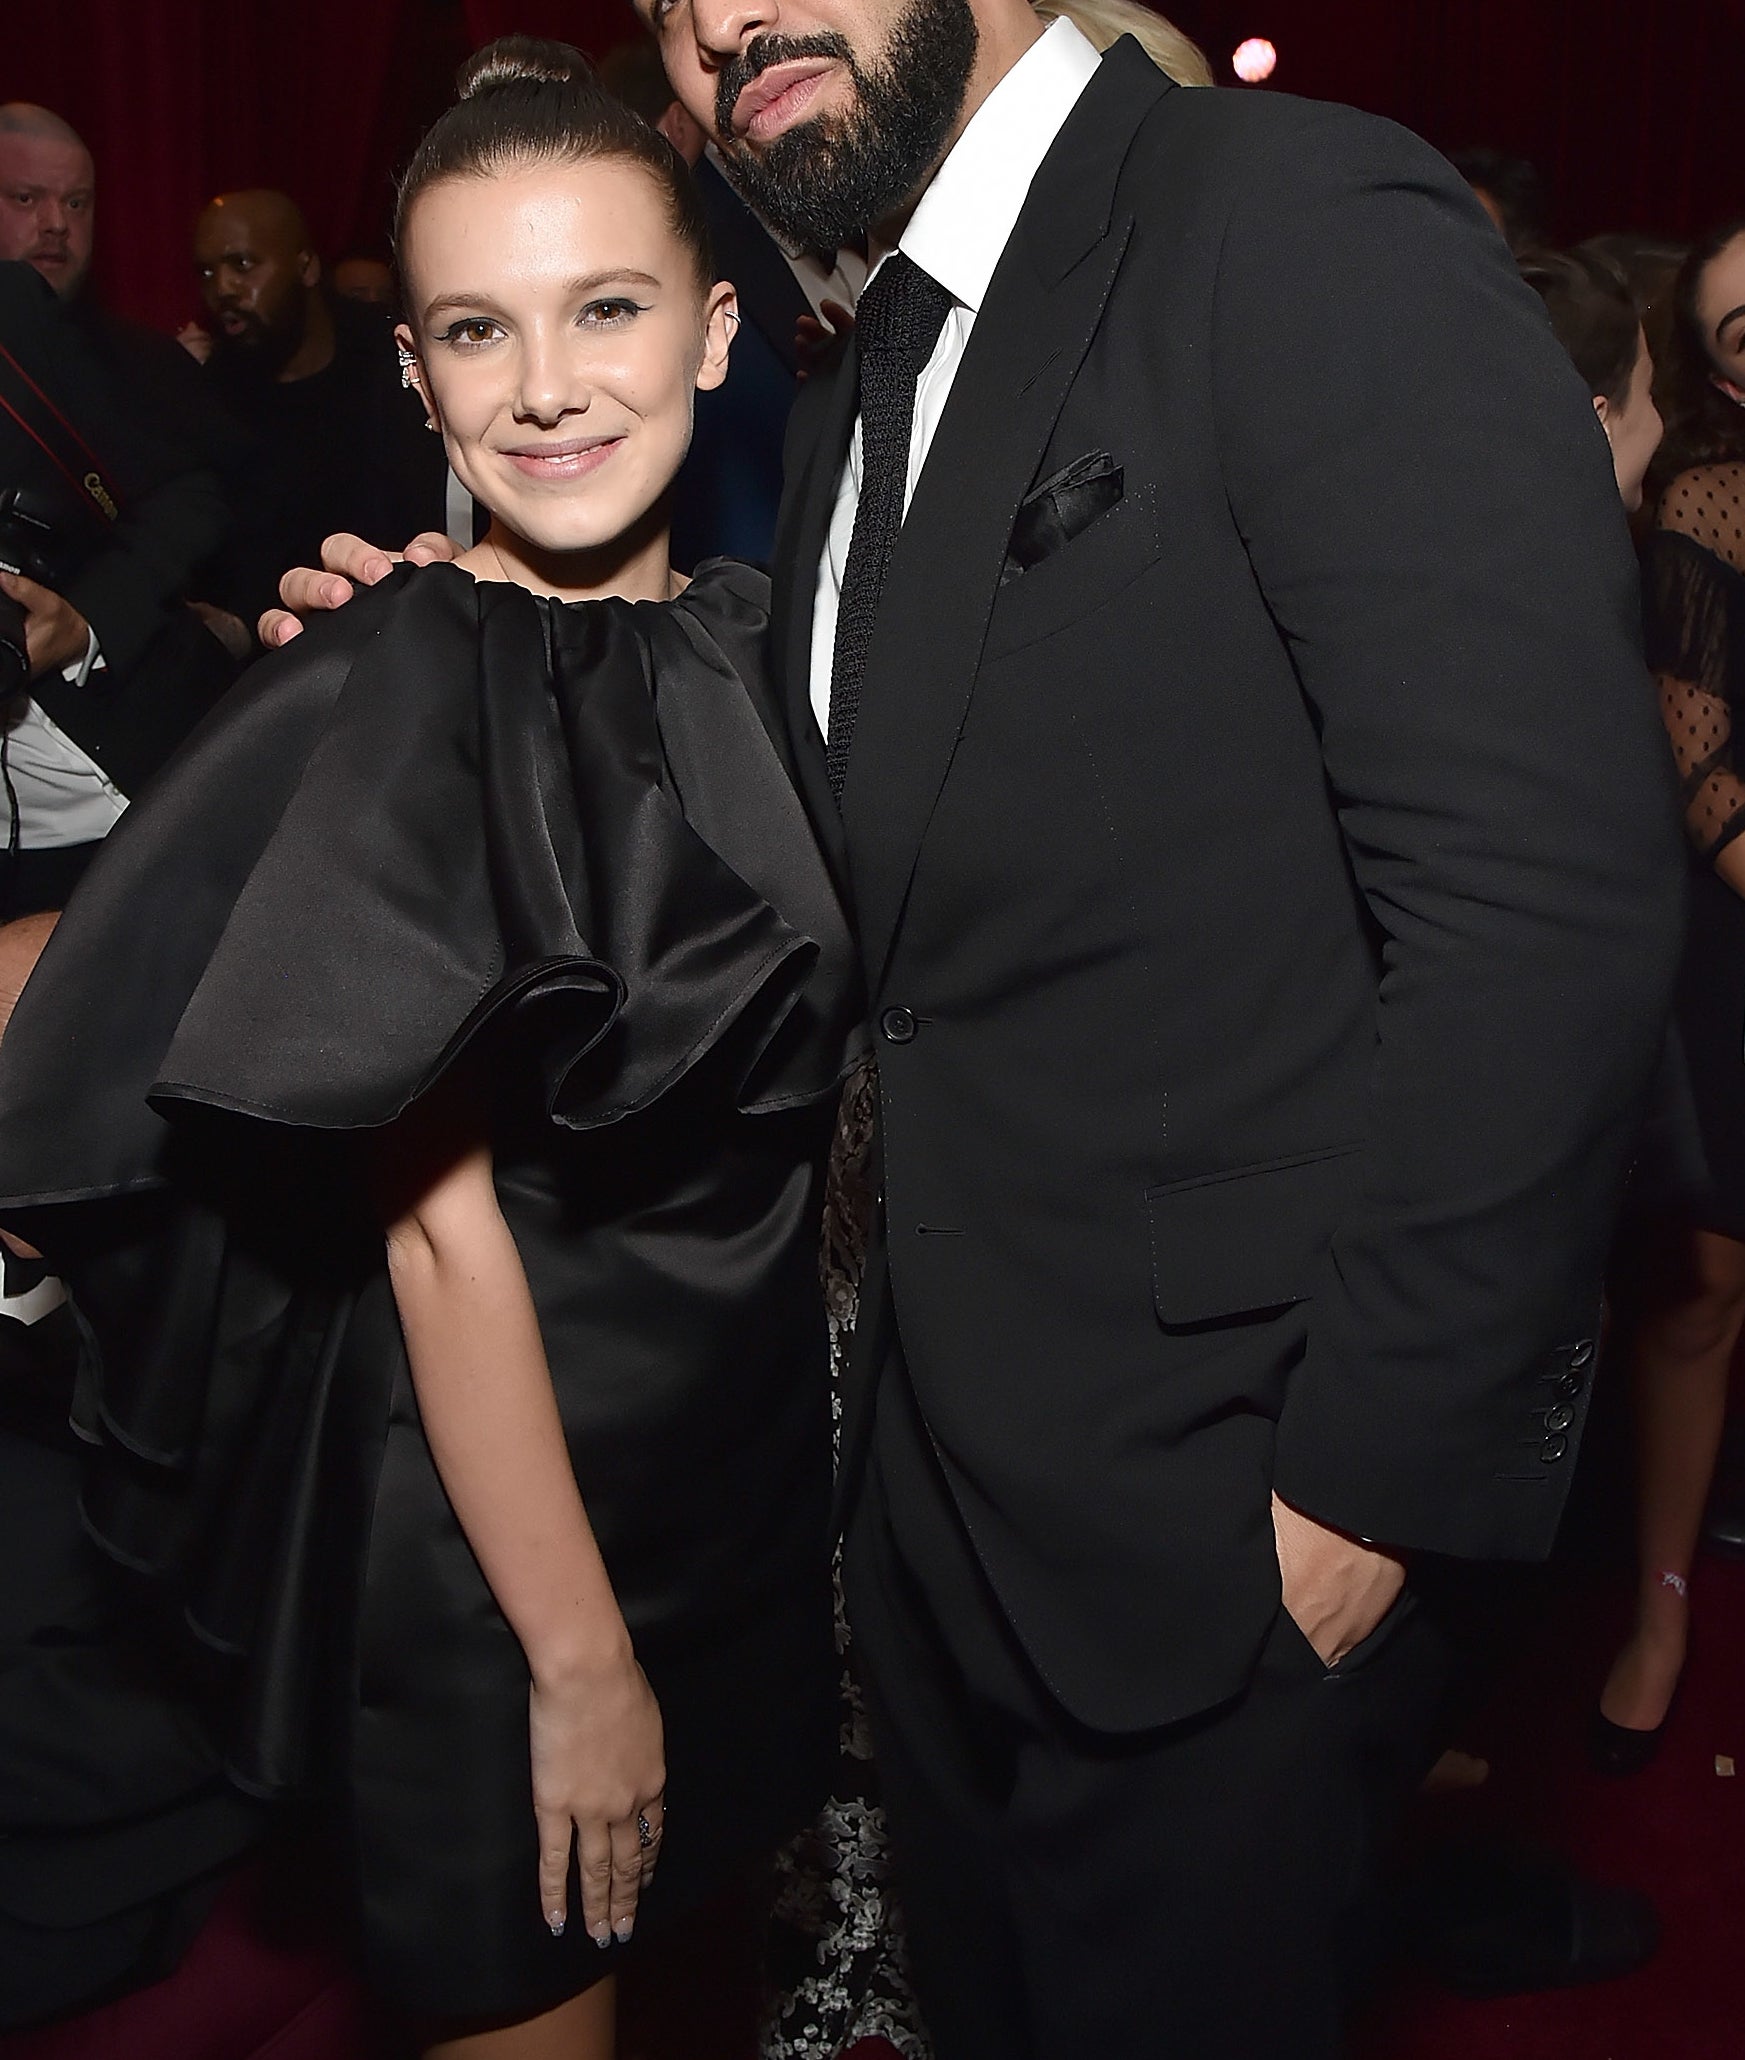 Millie Bobby Brown and Drake posing together at an event, both dressed in formal attire